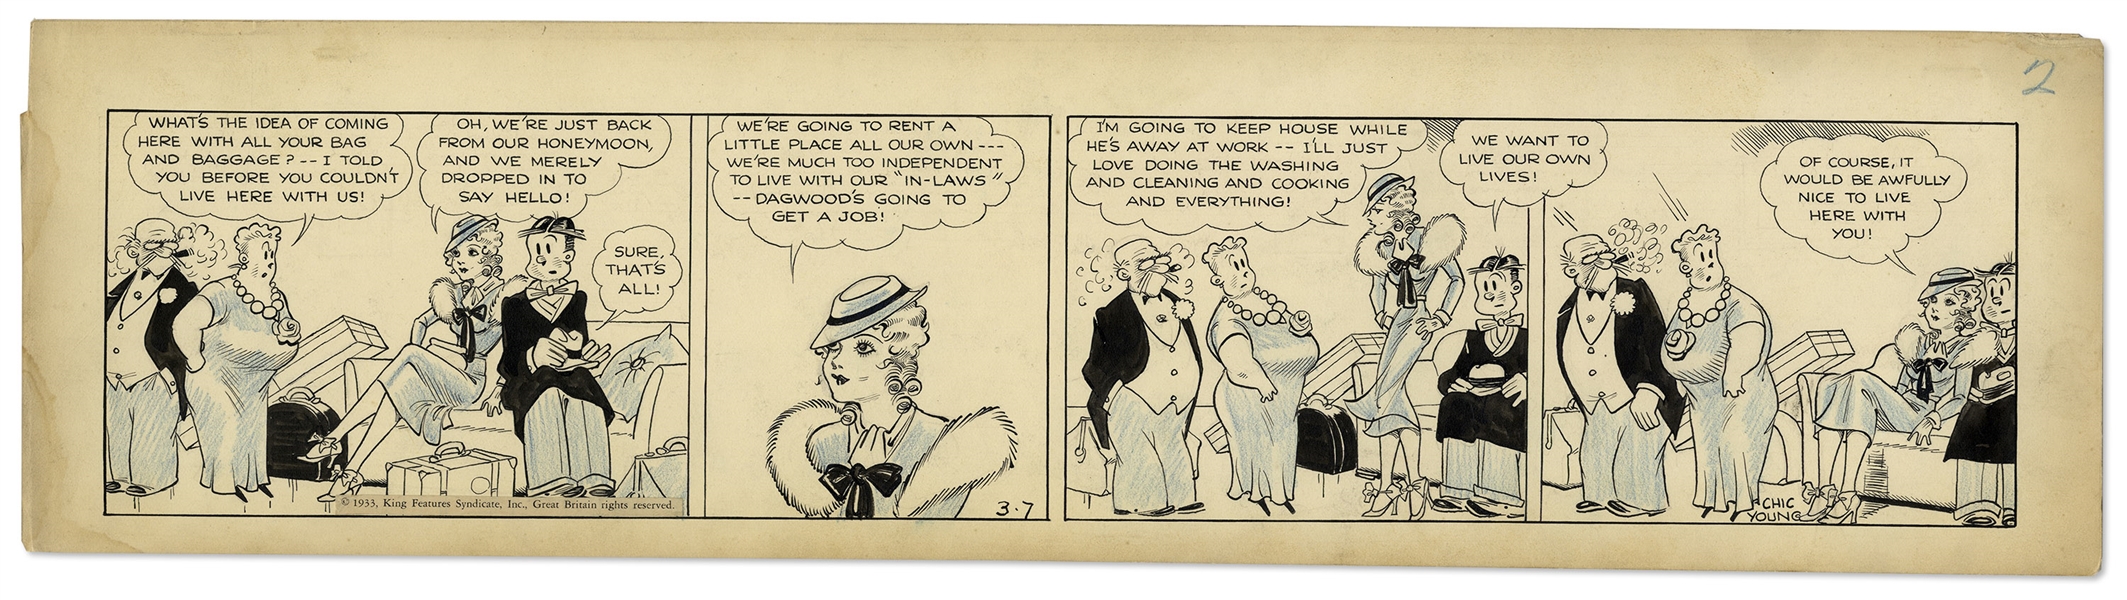 Chic Young Hand-Drawn ''Blondie'' Comic Strip From 1933 Titled ''Apartment Hunting'' -- Dagwood & Blondie Return From Their Honeymoon